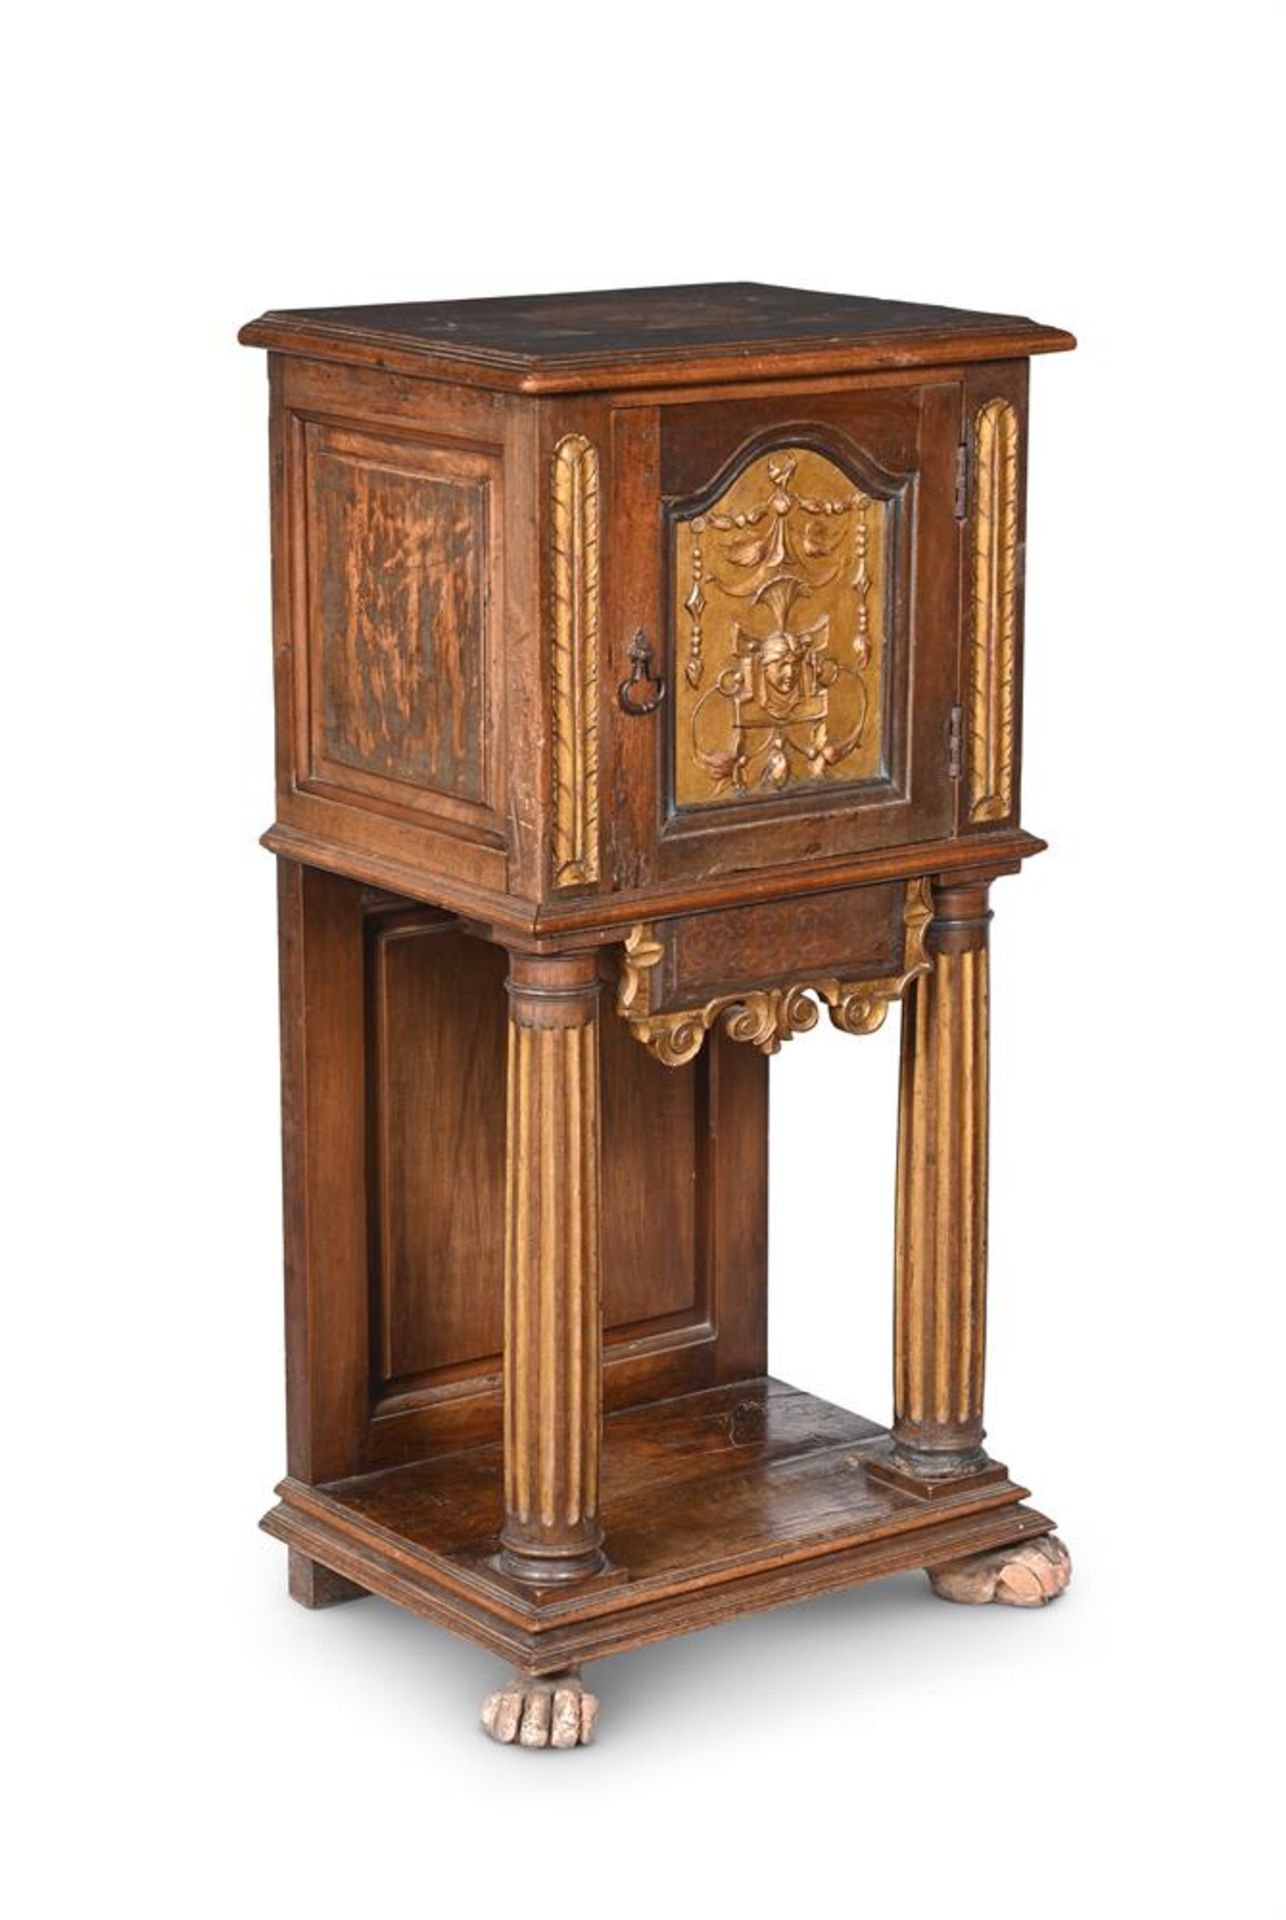 AN ITALIAN WALNUT AND PARCEL GILT PEDESTAL CUPBOARD, LATE 17TH OR EARLY 18TH CENTURY AND LATER